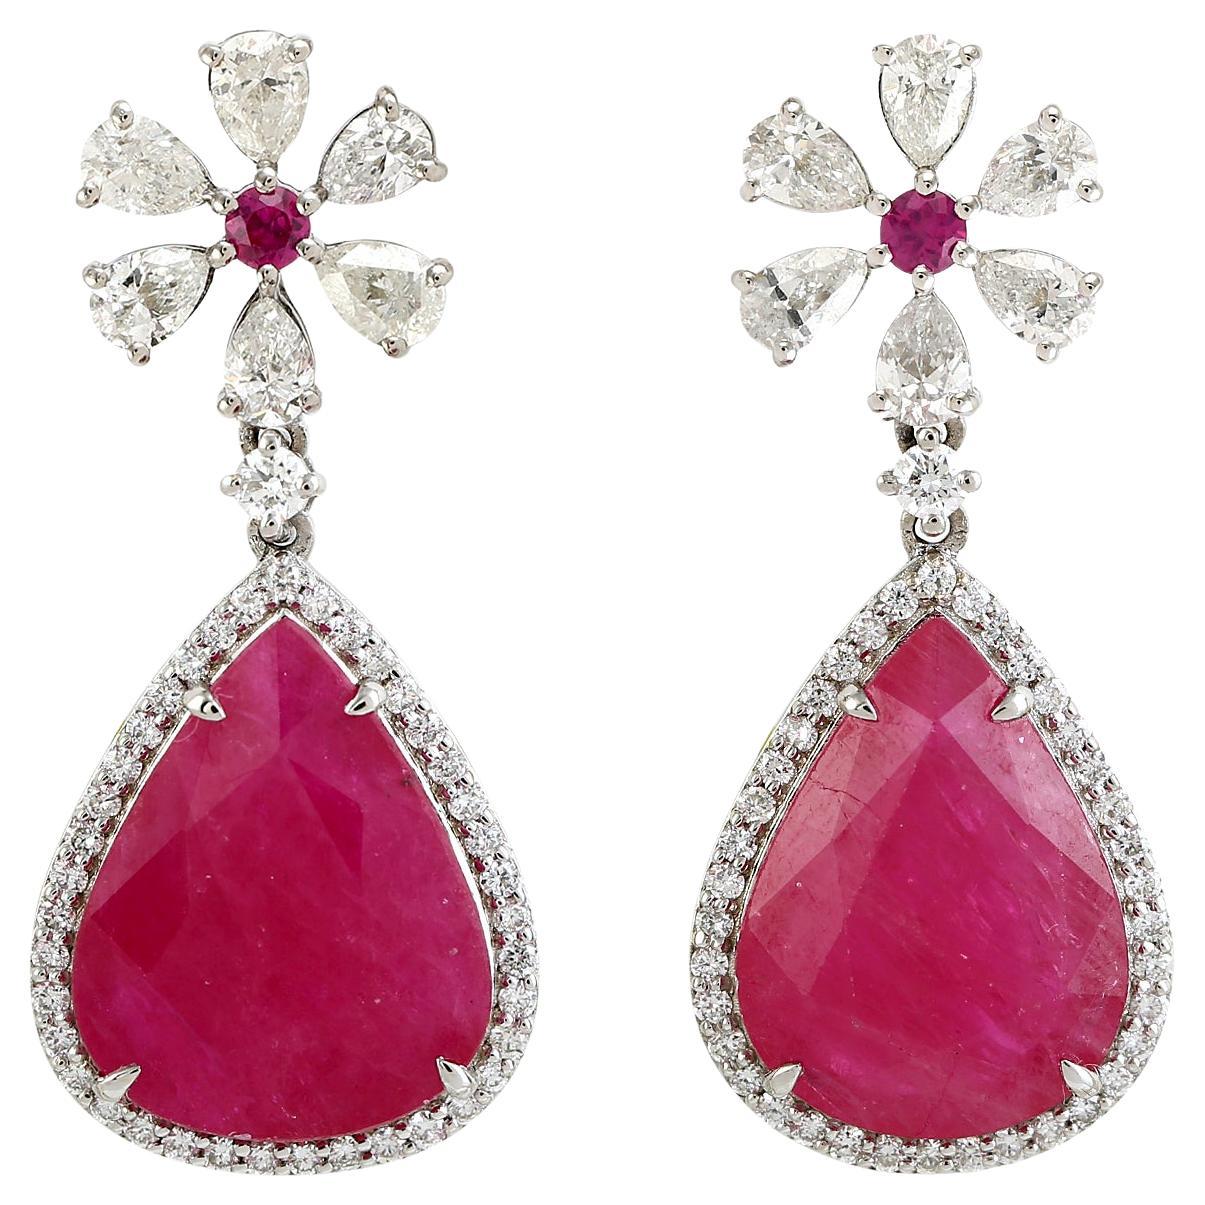 Two Tier Mosambic Ruby Dangle Earrings With Diamonds Made In 18k White Gold For Sale